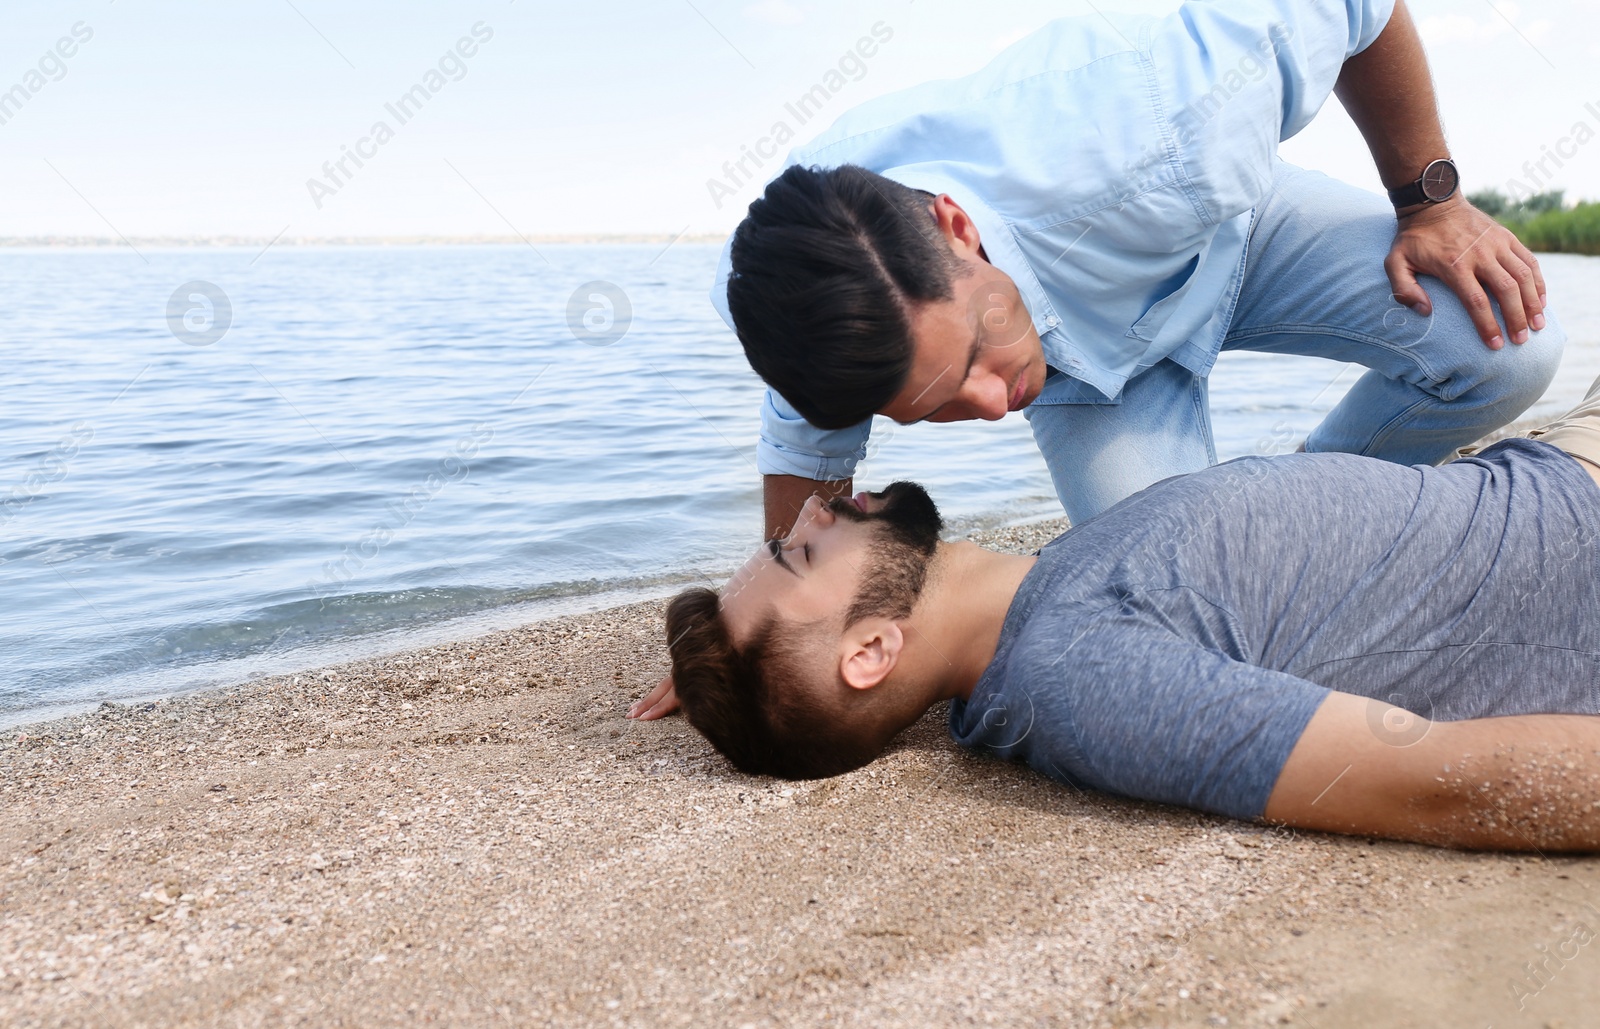 Photo of Passerby checking for breathing of unconscious young man near sea